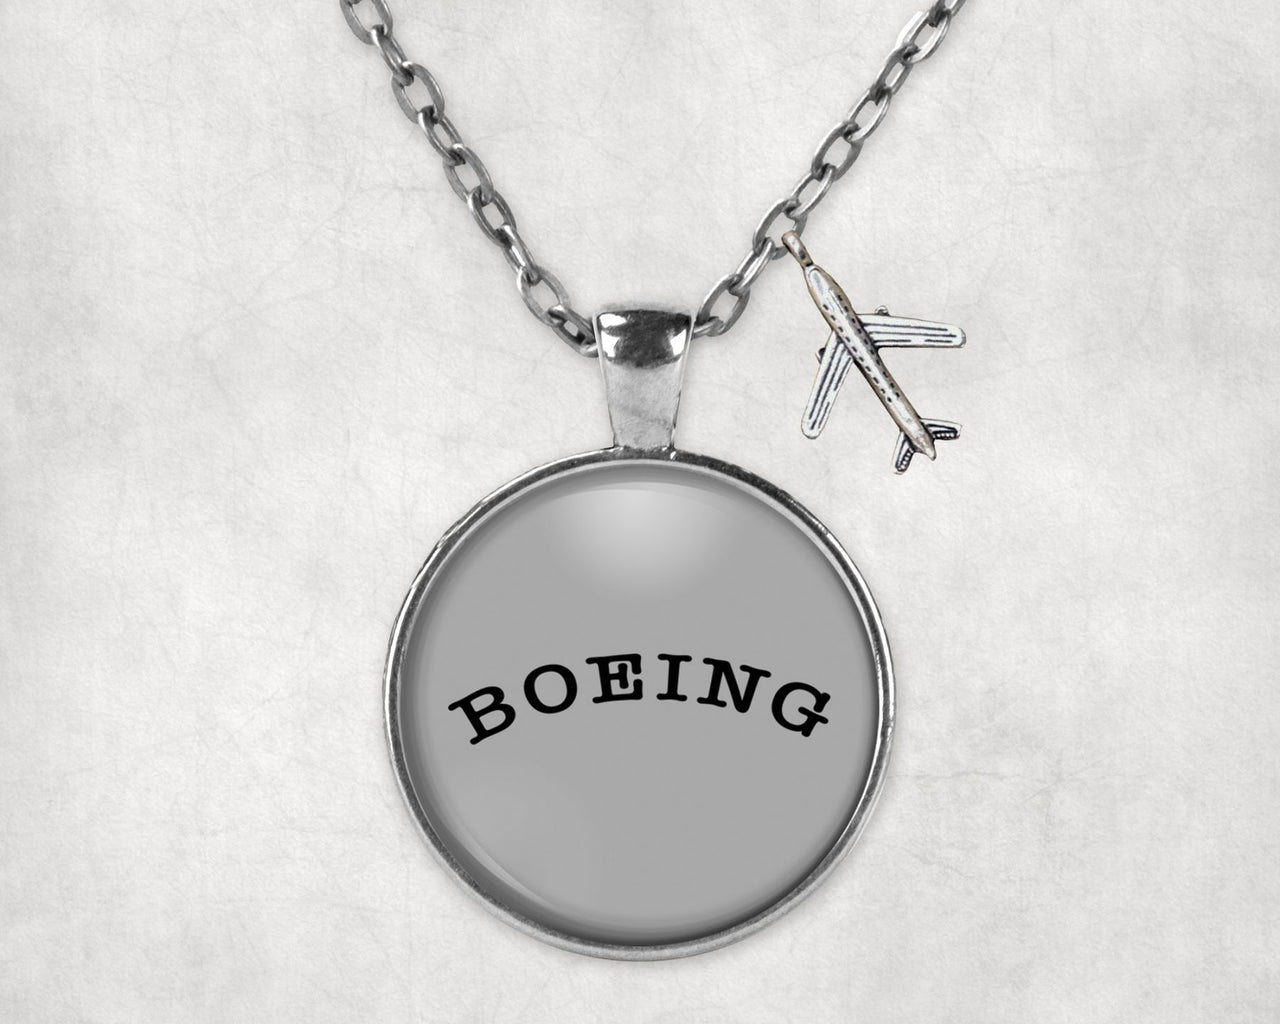 Special BOEING Text Designed Necklaces